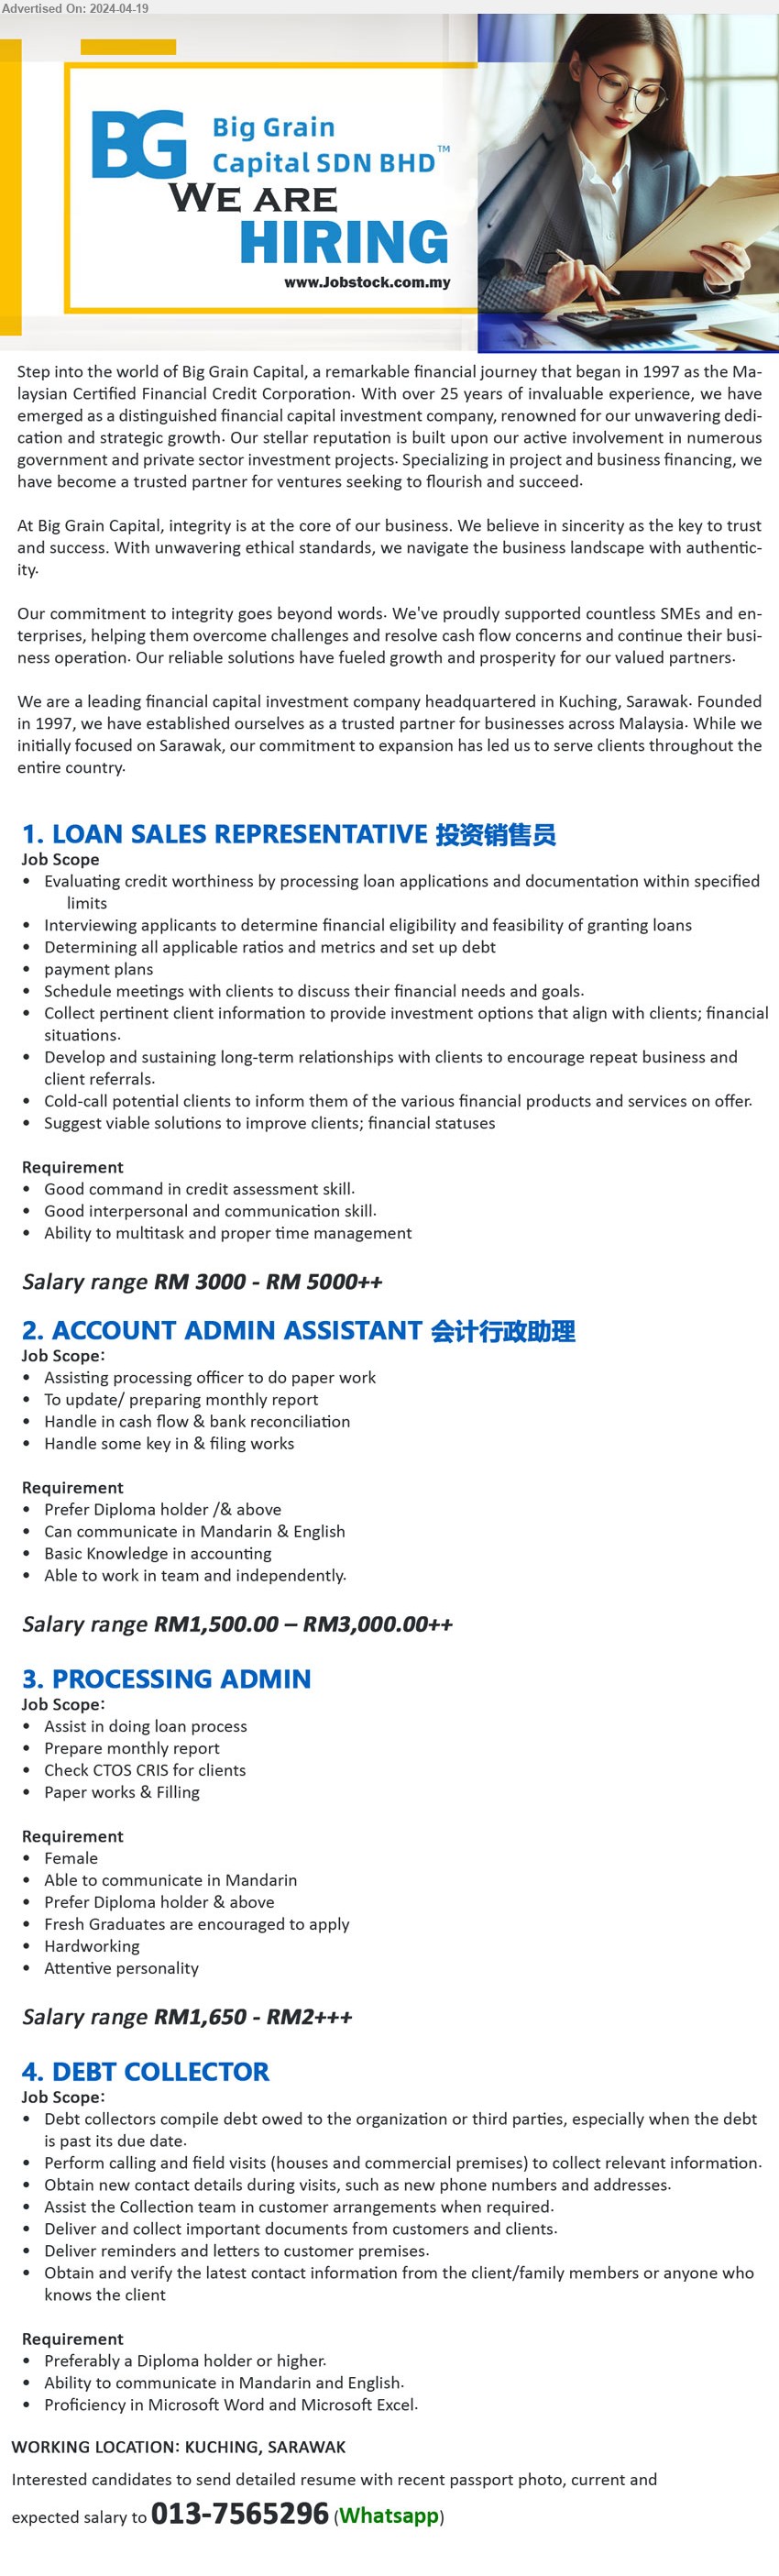 BIG GRAIN CAPITAL SDN BHD - 1. LOAN SALES REPRESENTATIVE 投资销售员 (Kuching), RM 3000 - RM 5000++, Good command in credit assessment skill, Good interpersonal and communication skill.,...
2. ACCOUNT ADMIN ASSISTANT 会计行政助理 (Kuching), RM1,500.00 – RM3,000.00++, Prefer Diploma holder /& above, Can communicate in Mandarin & English ,...
3. PROCESSING ADMIN (Kuching), RM1,650 - RM2+++, Diploma,  Fresh Graduates are encouraged to apply,...
4. DEBT COLLECTOR (Kuching), Diploma, Ability to communicate in Mandarin and English.,...
Whatsapp to: 013-7565296 